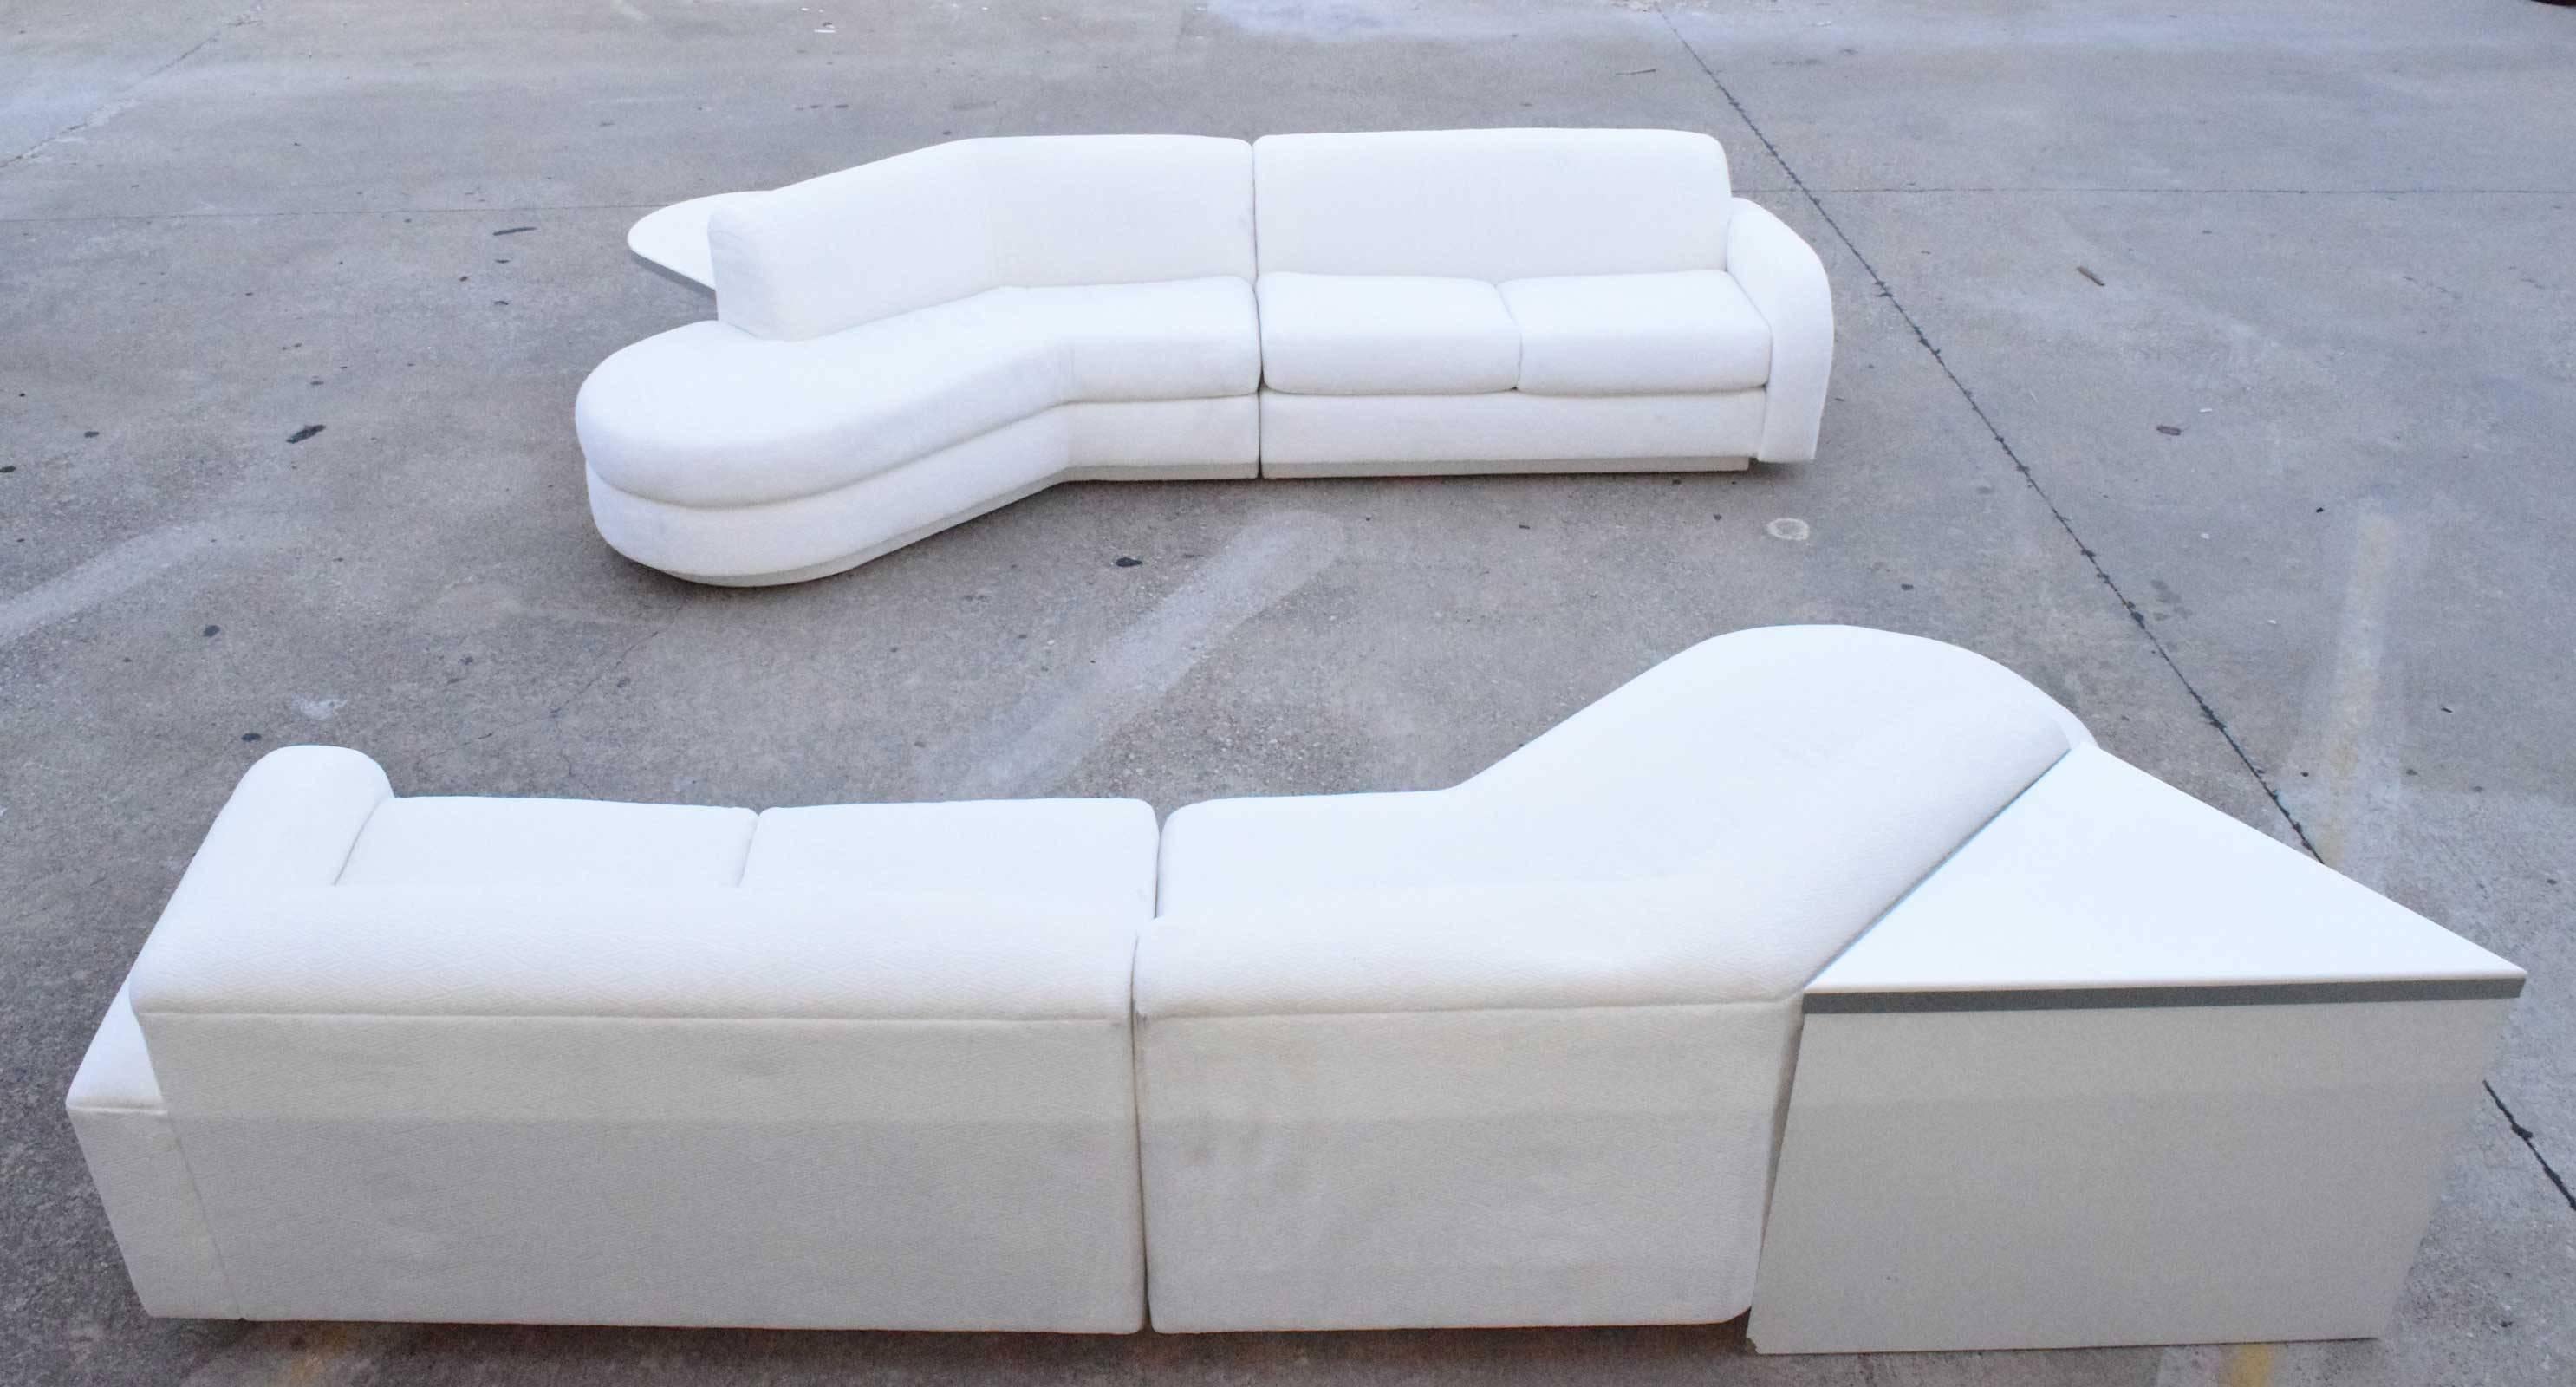 A beautiful pair of matching sofas by Vladimir Kagan for Directional. The sofas are done in a white textured fabric. The tables are not attached but butt up to sofas as desired.